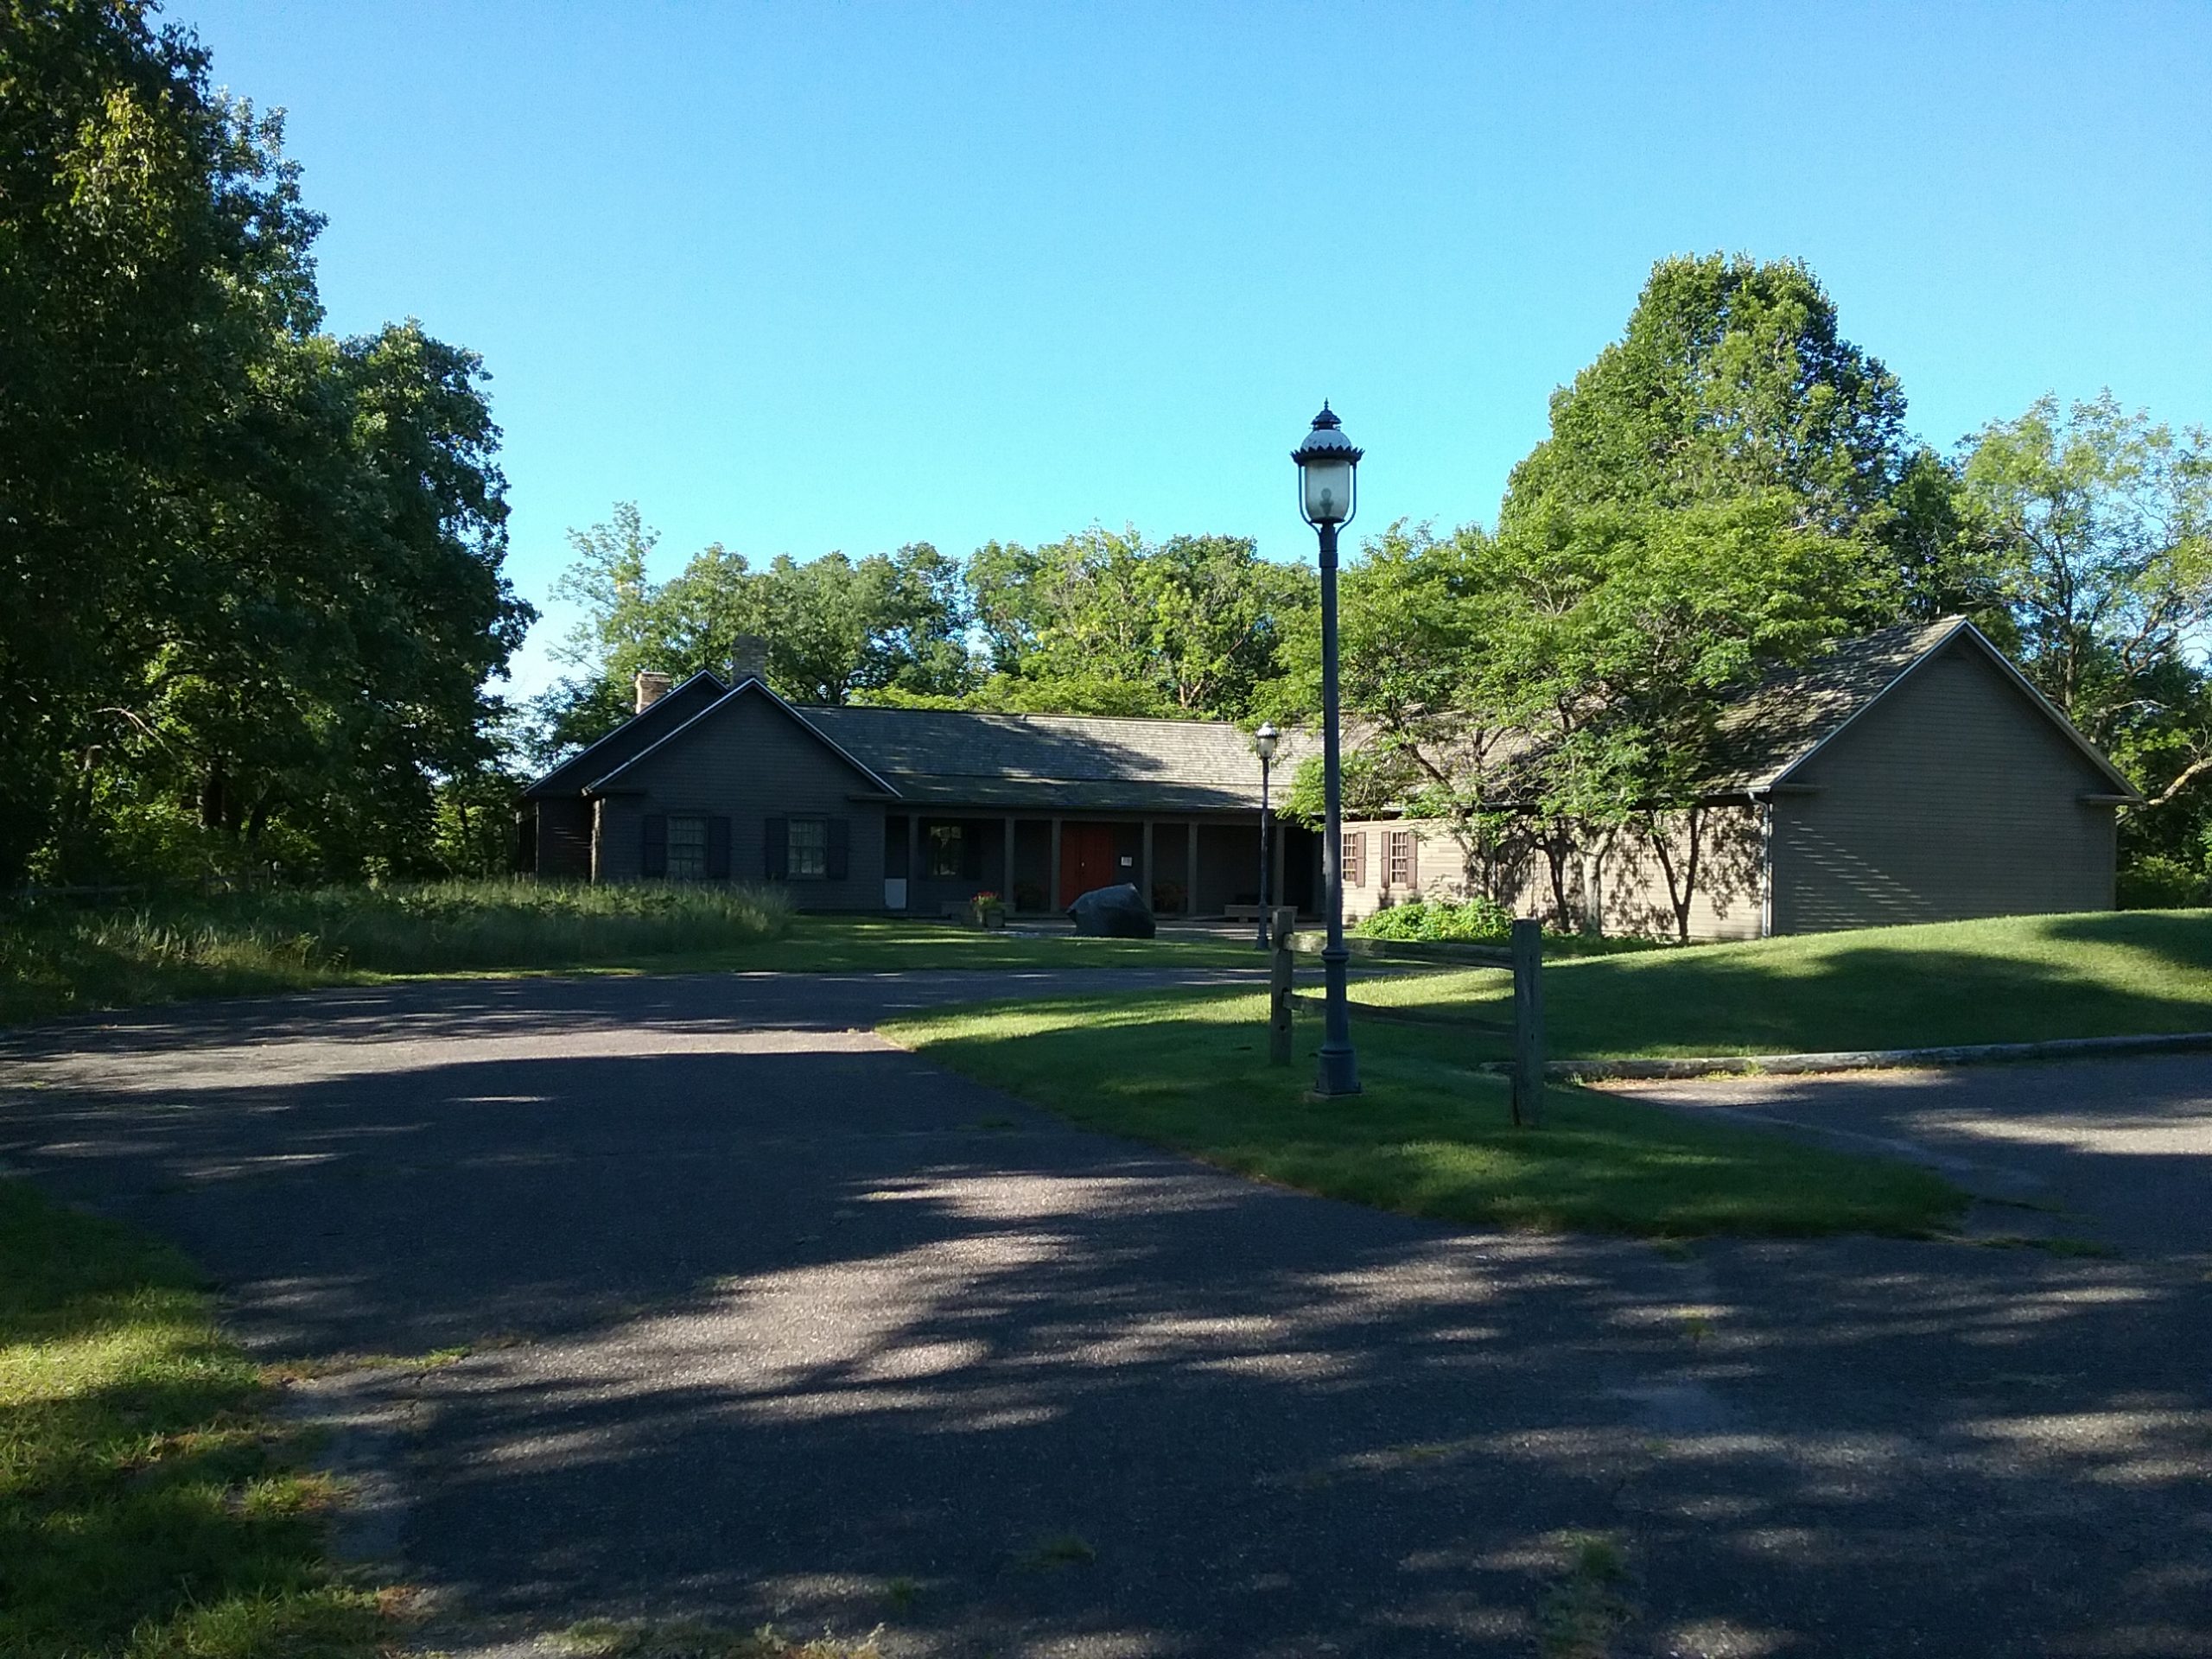 The Charles A. Weyerhaeuser Memorial Museum, home of the Morrison County Historical Society, Little Falls, MN, 2020.